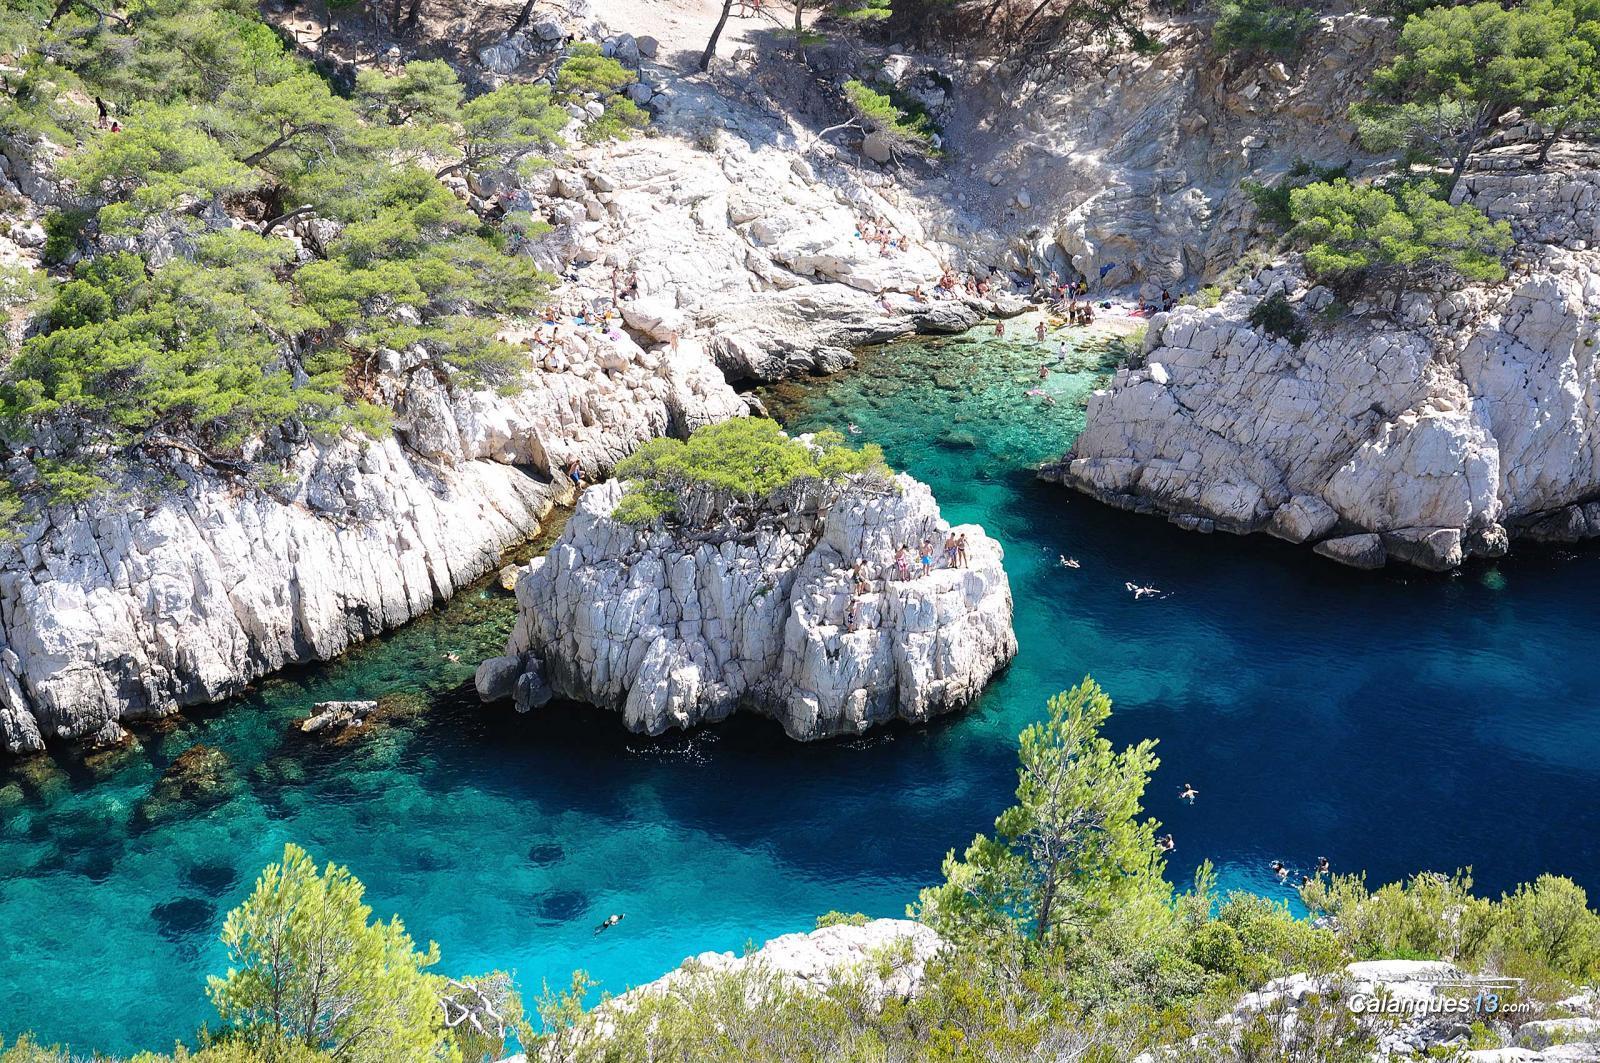 Cover image of this place Calanques de Sugiton